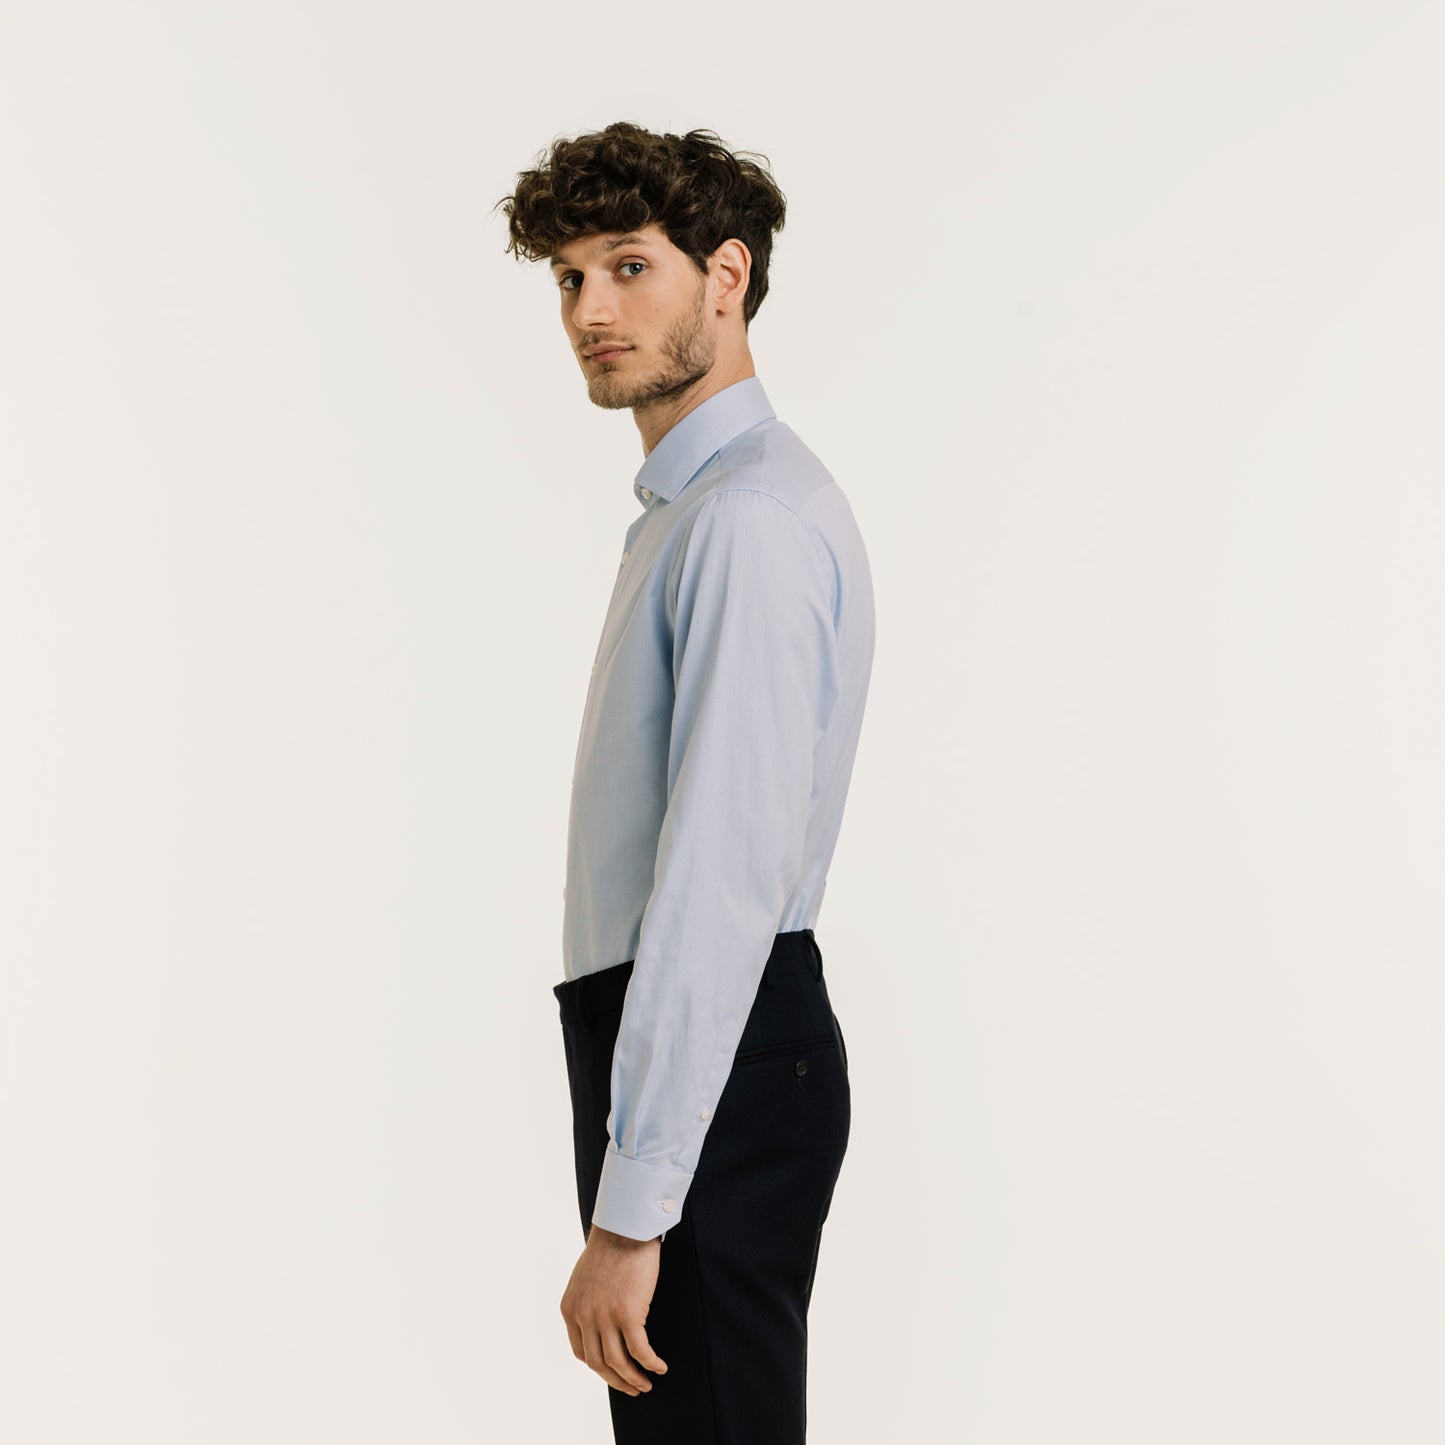 Fitted shirt in blue double-twisted oxford